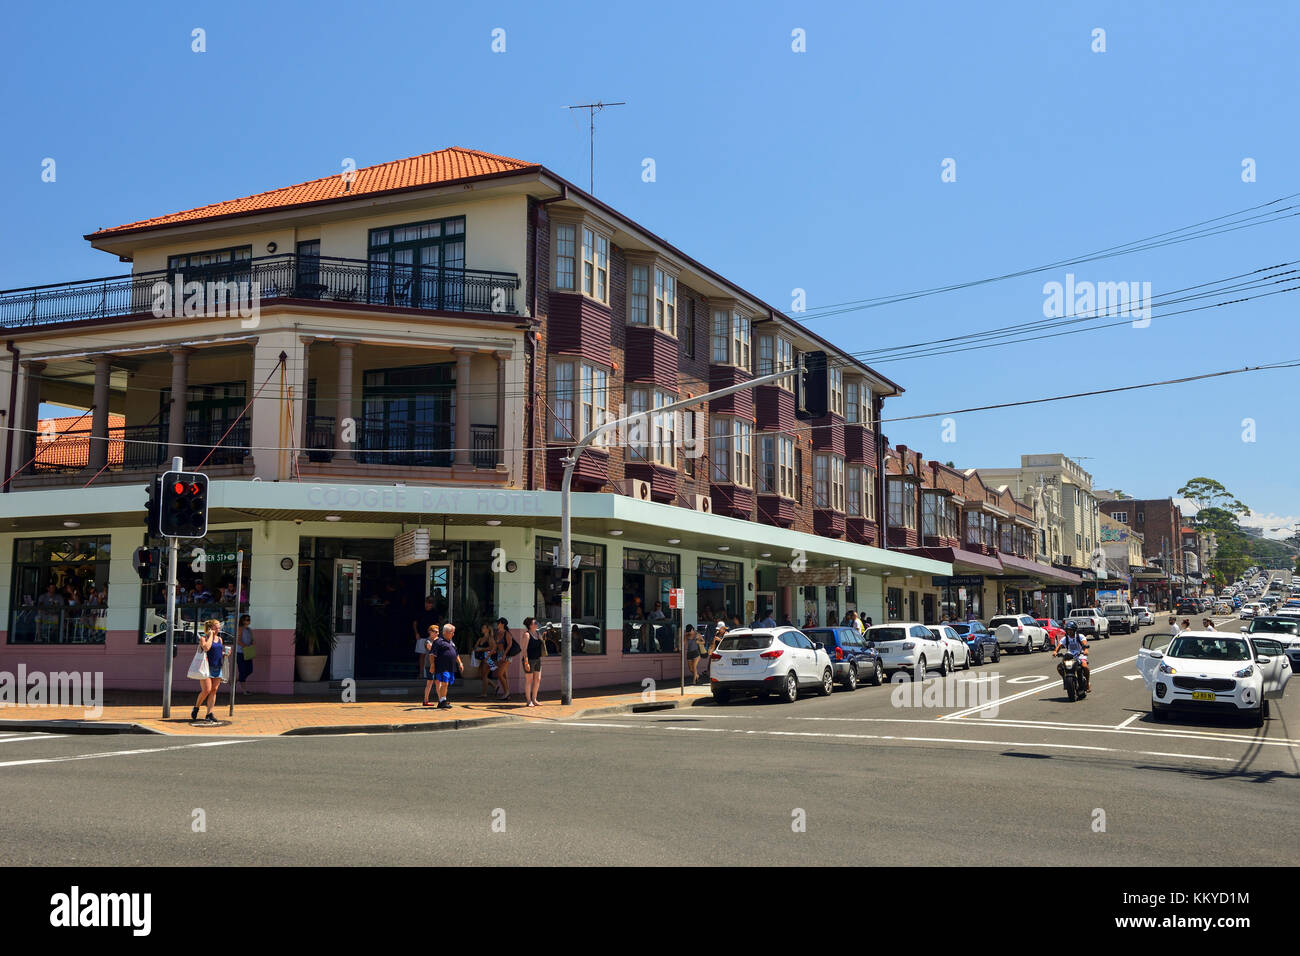 Coogee Bay Hotel and main street in Coogee, an eastern suburb of Sydney, New South Wales, Australia Stock Photo